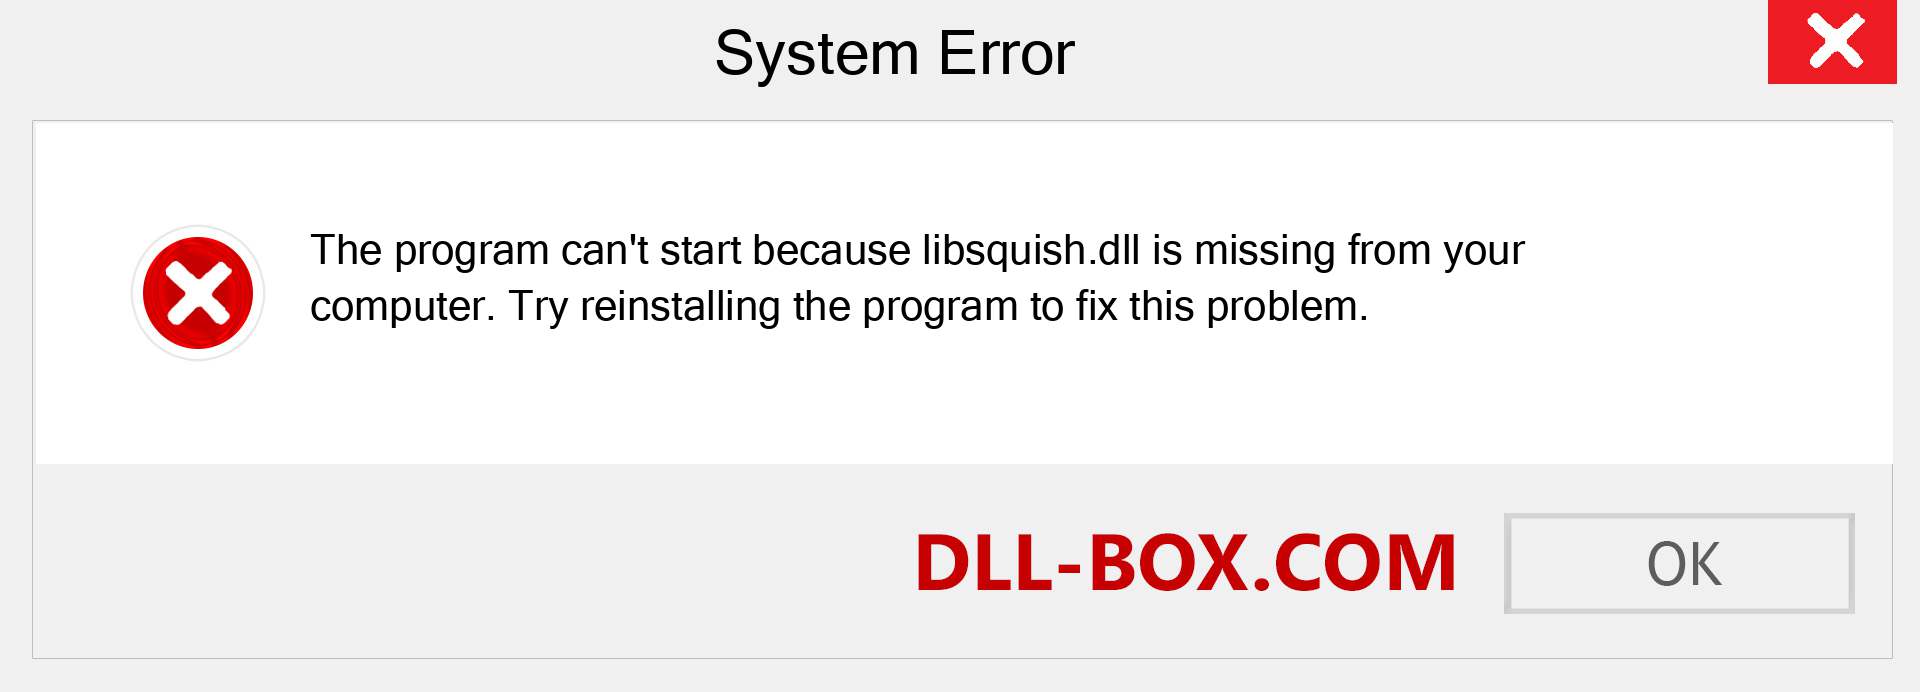  libsquish.dll file is missing?. Download for Windows 7, 8, 10 - Fix  libsquish dll Missing Error on Windows, photos, images